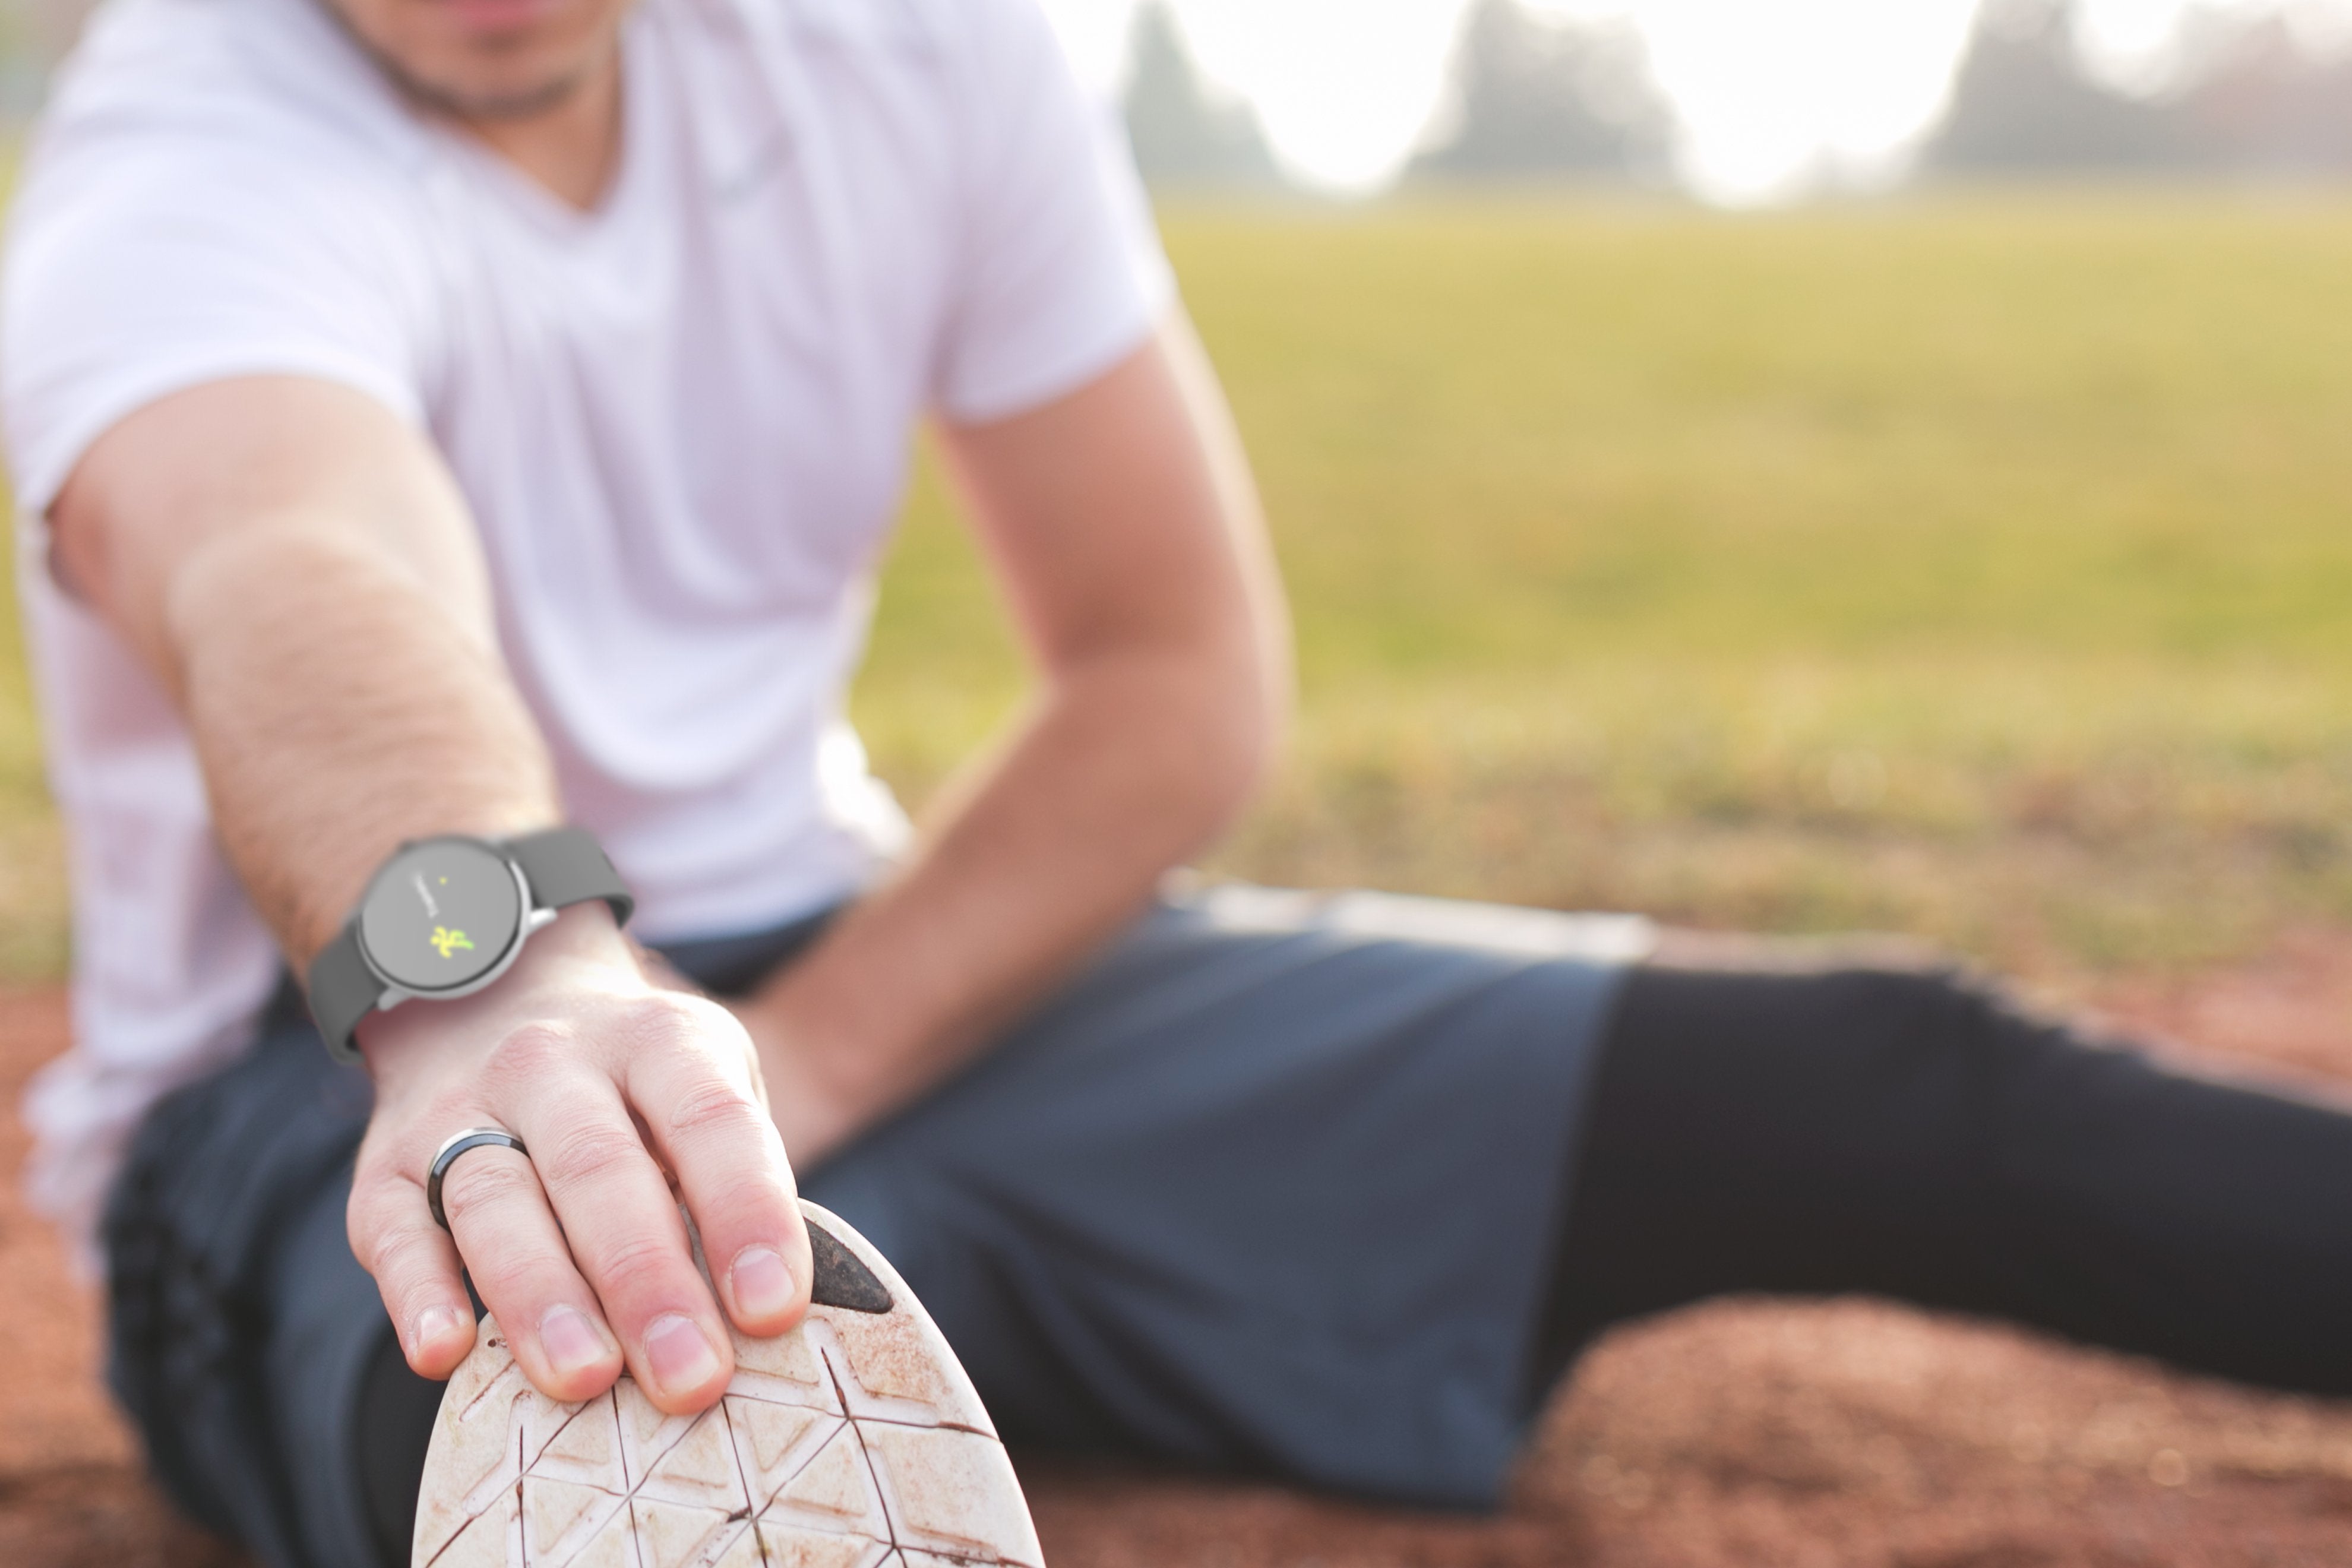 7 Reasons Why You Should Get a Fitness Tracker for Your Healthy Lifestyle